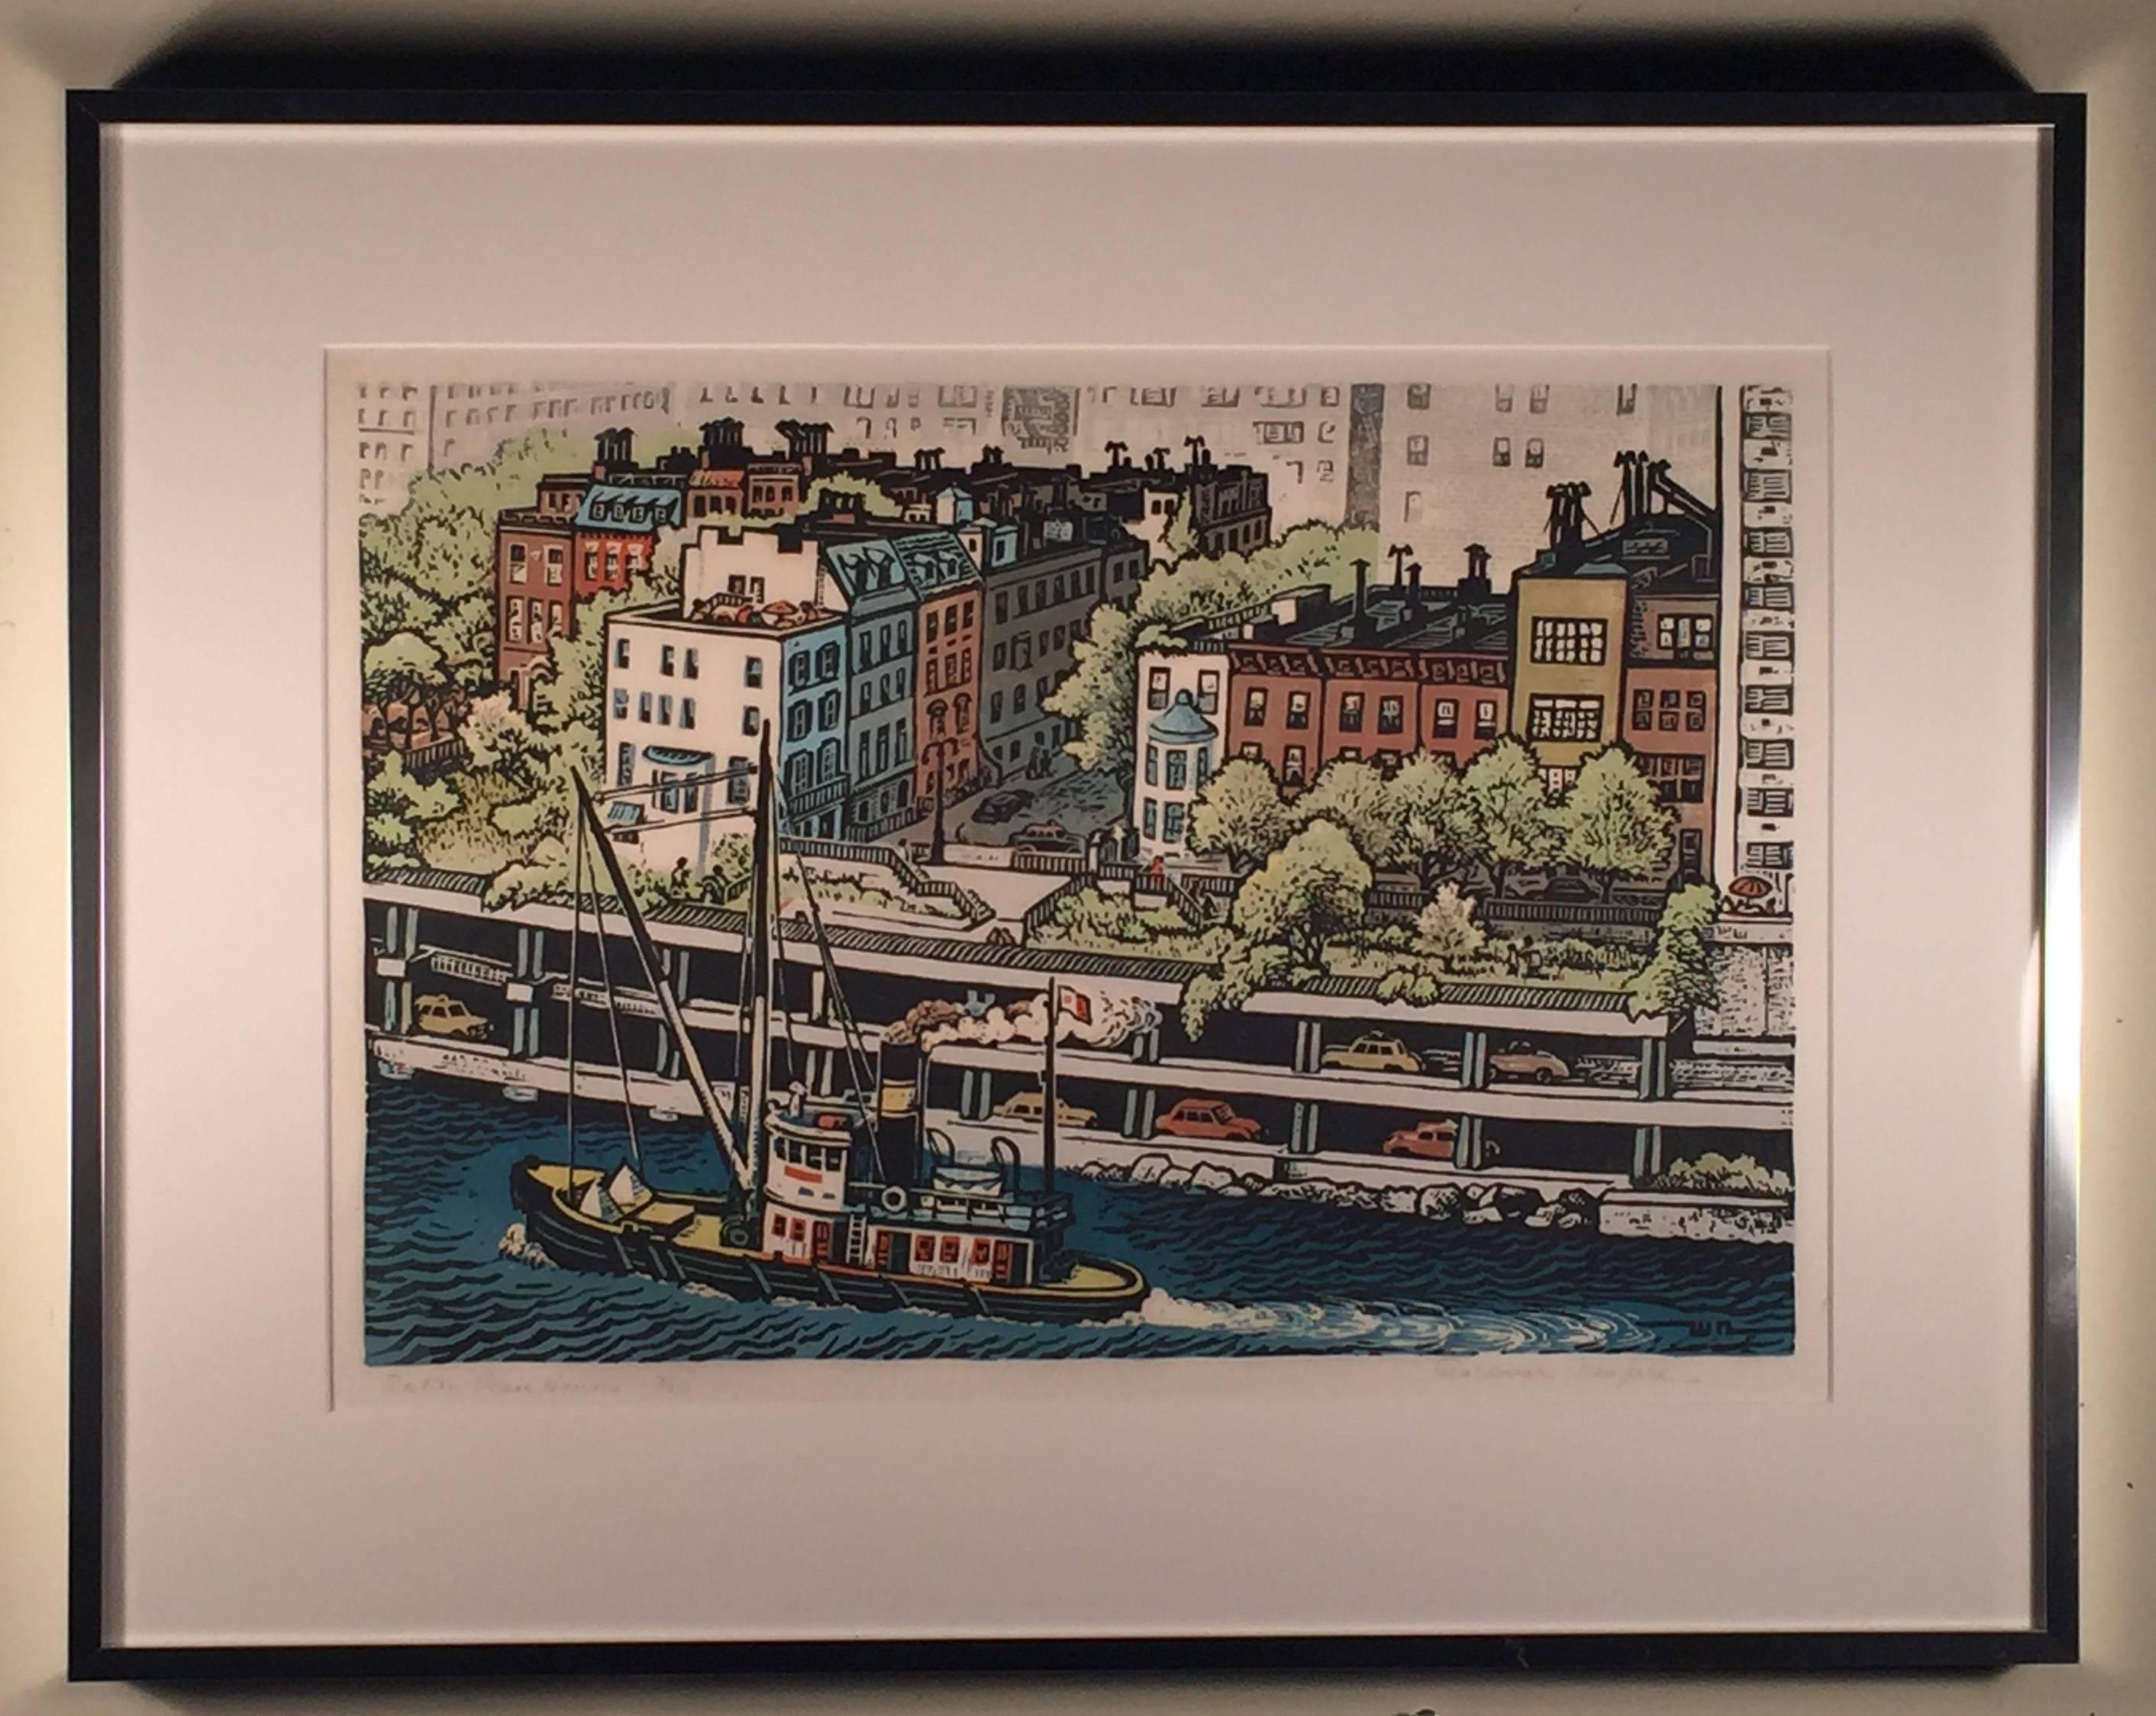 SUTTON PLACE HOUSES - Print by Woldemar Neufeld